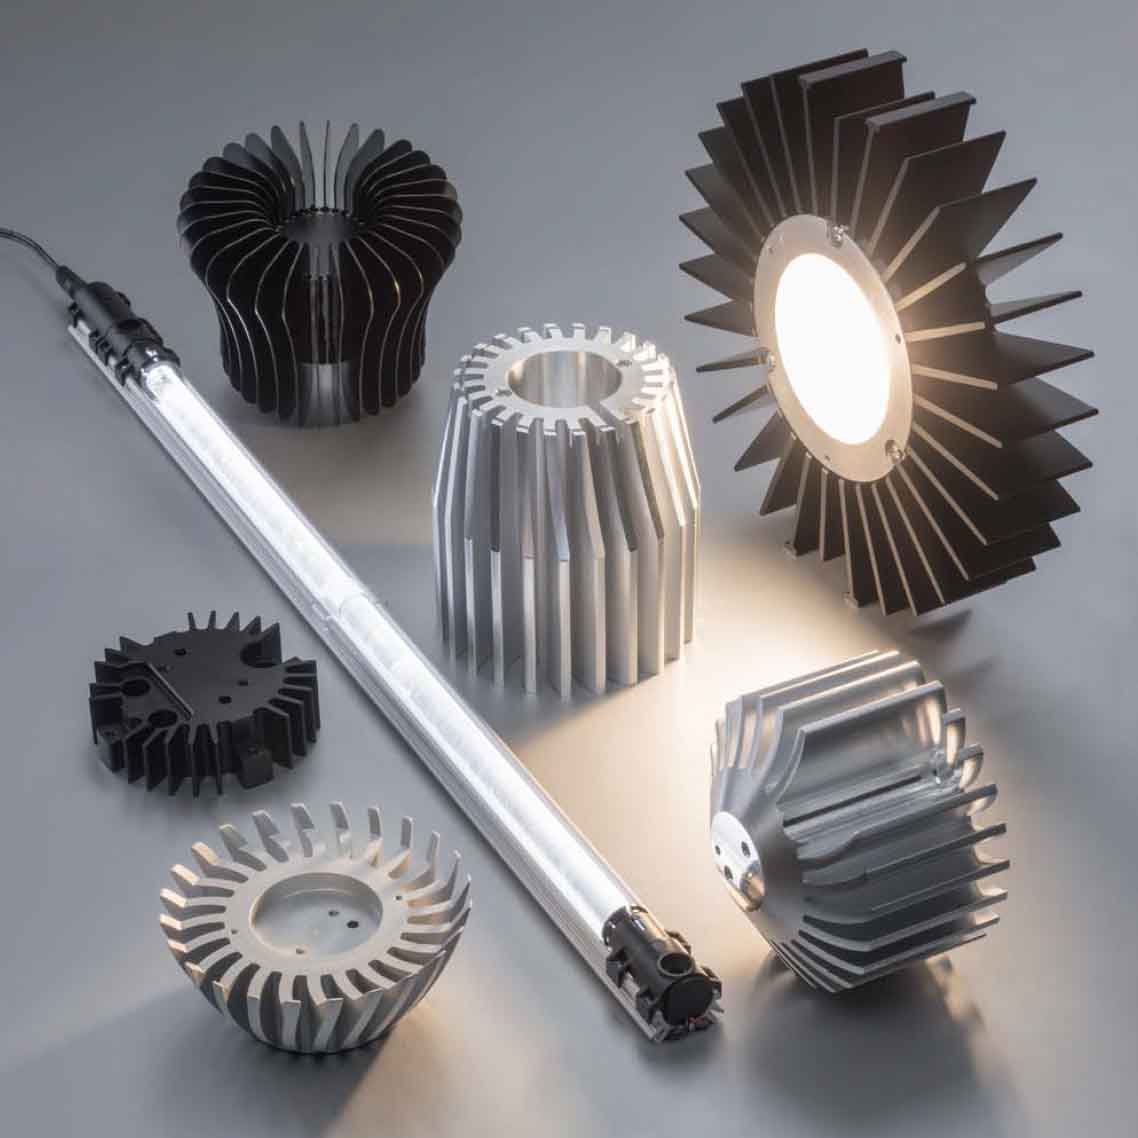 Led Heat Sink: Everything You Need To Know